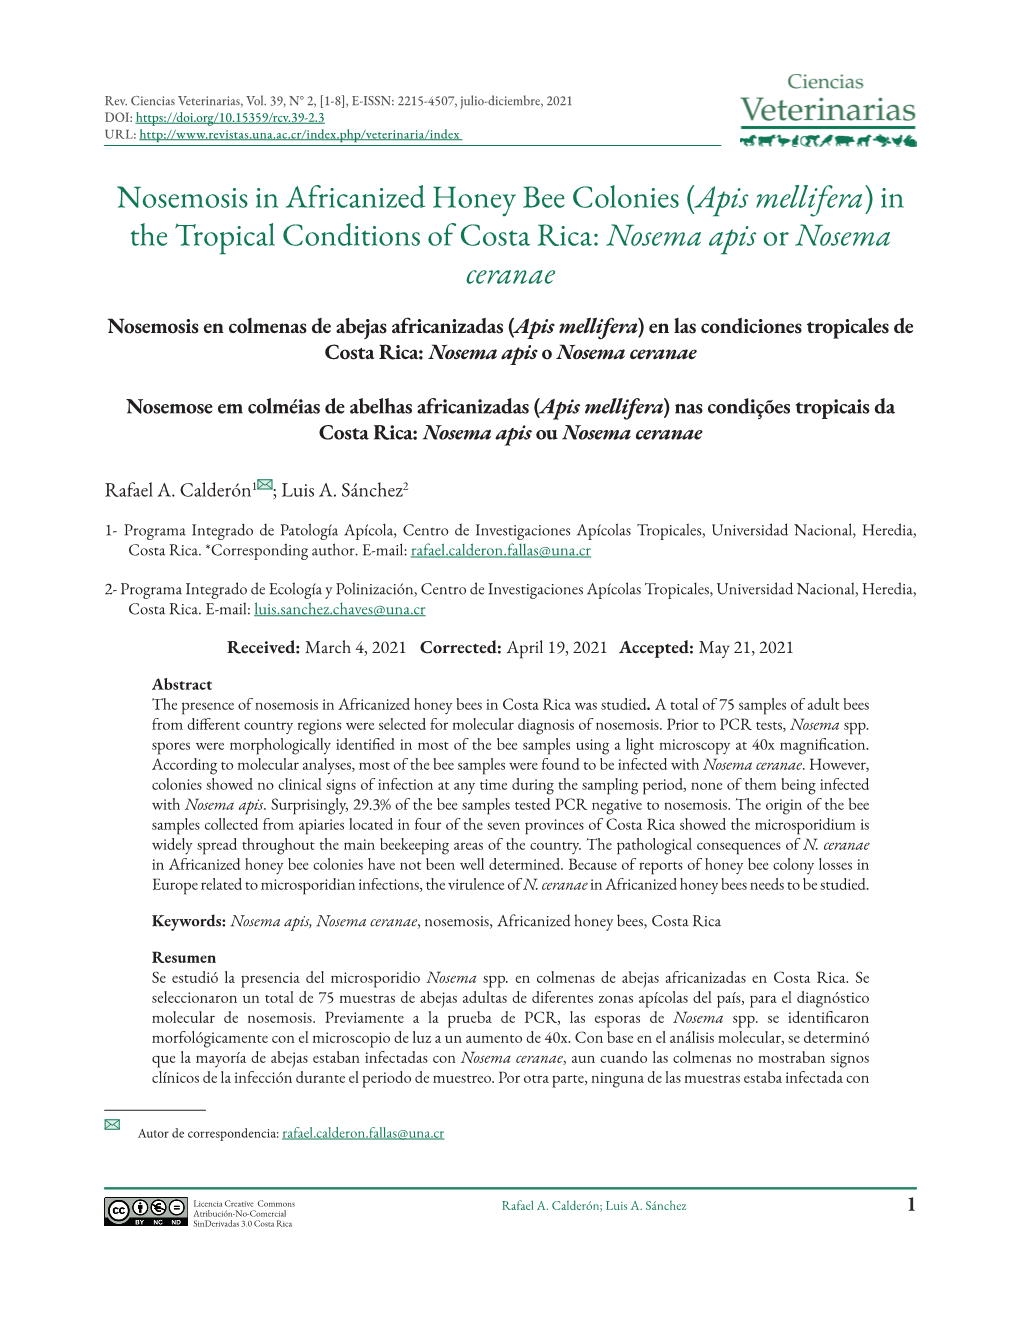 Nosemosis in Africanized Honey Bee Colonies (Apis Mellifera) in the Tropical Conditions of Costa Rica: Nosema Apis Or Nosema Ceranae